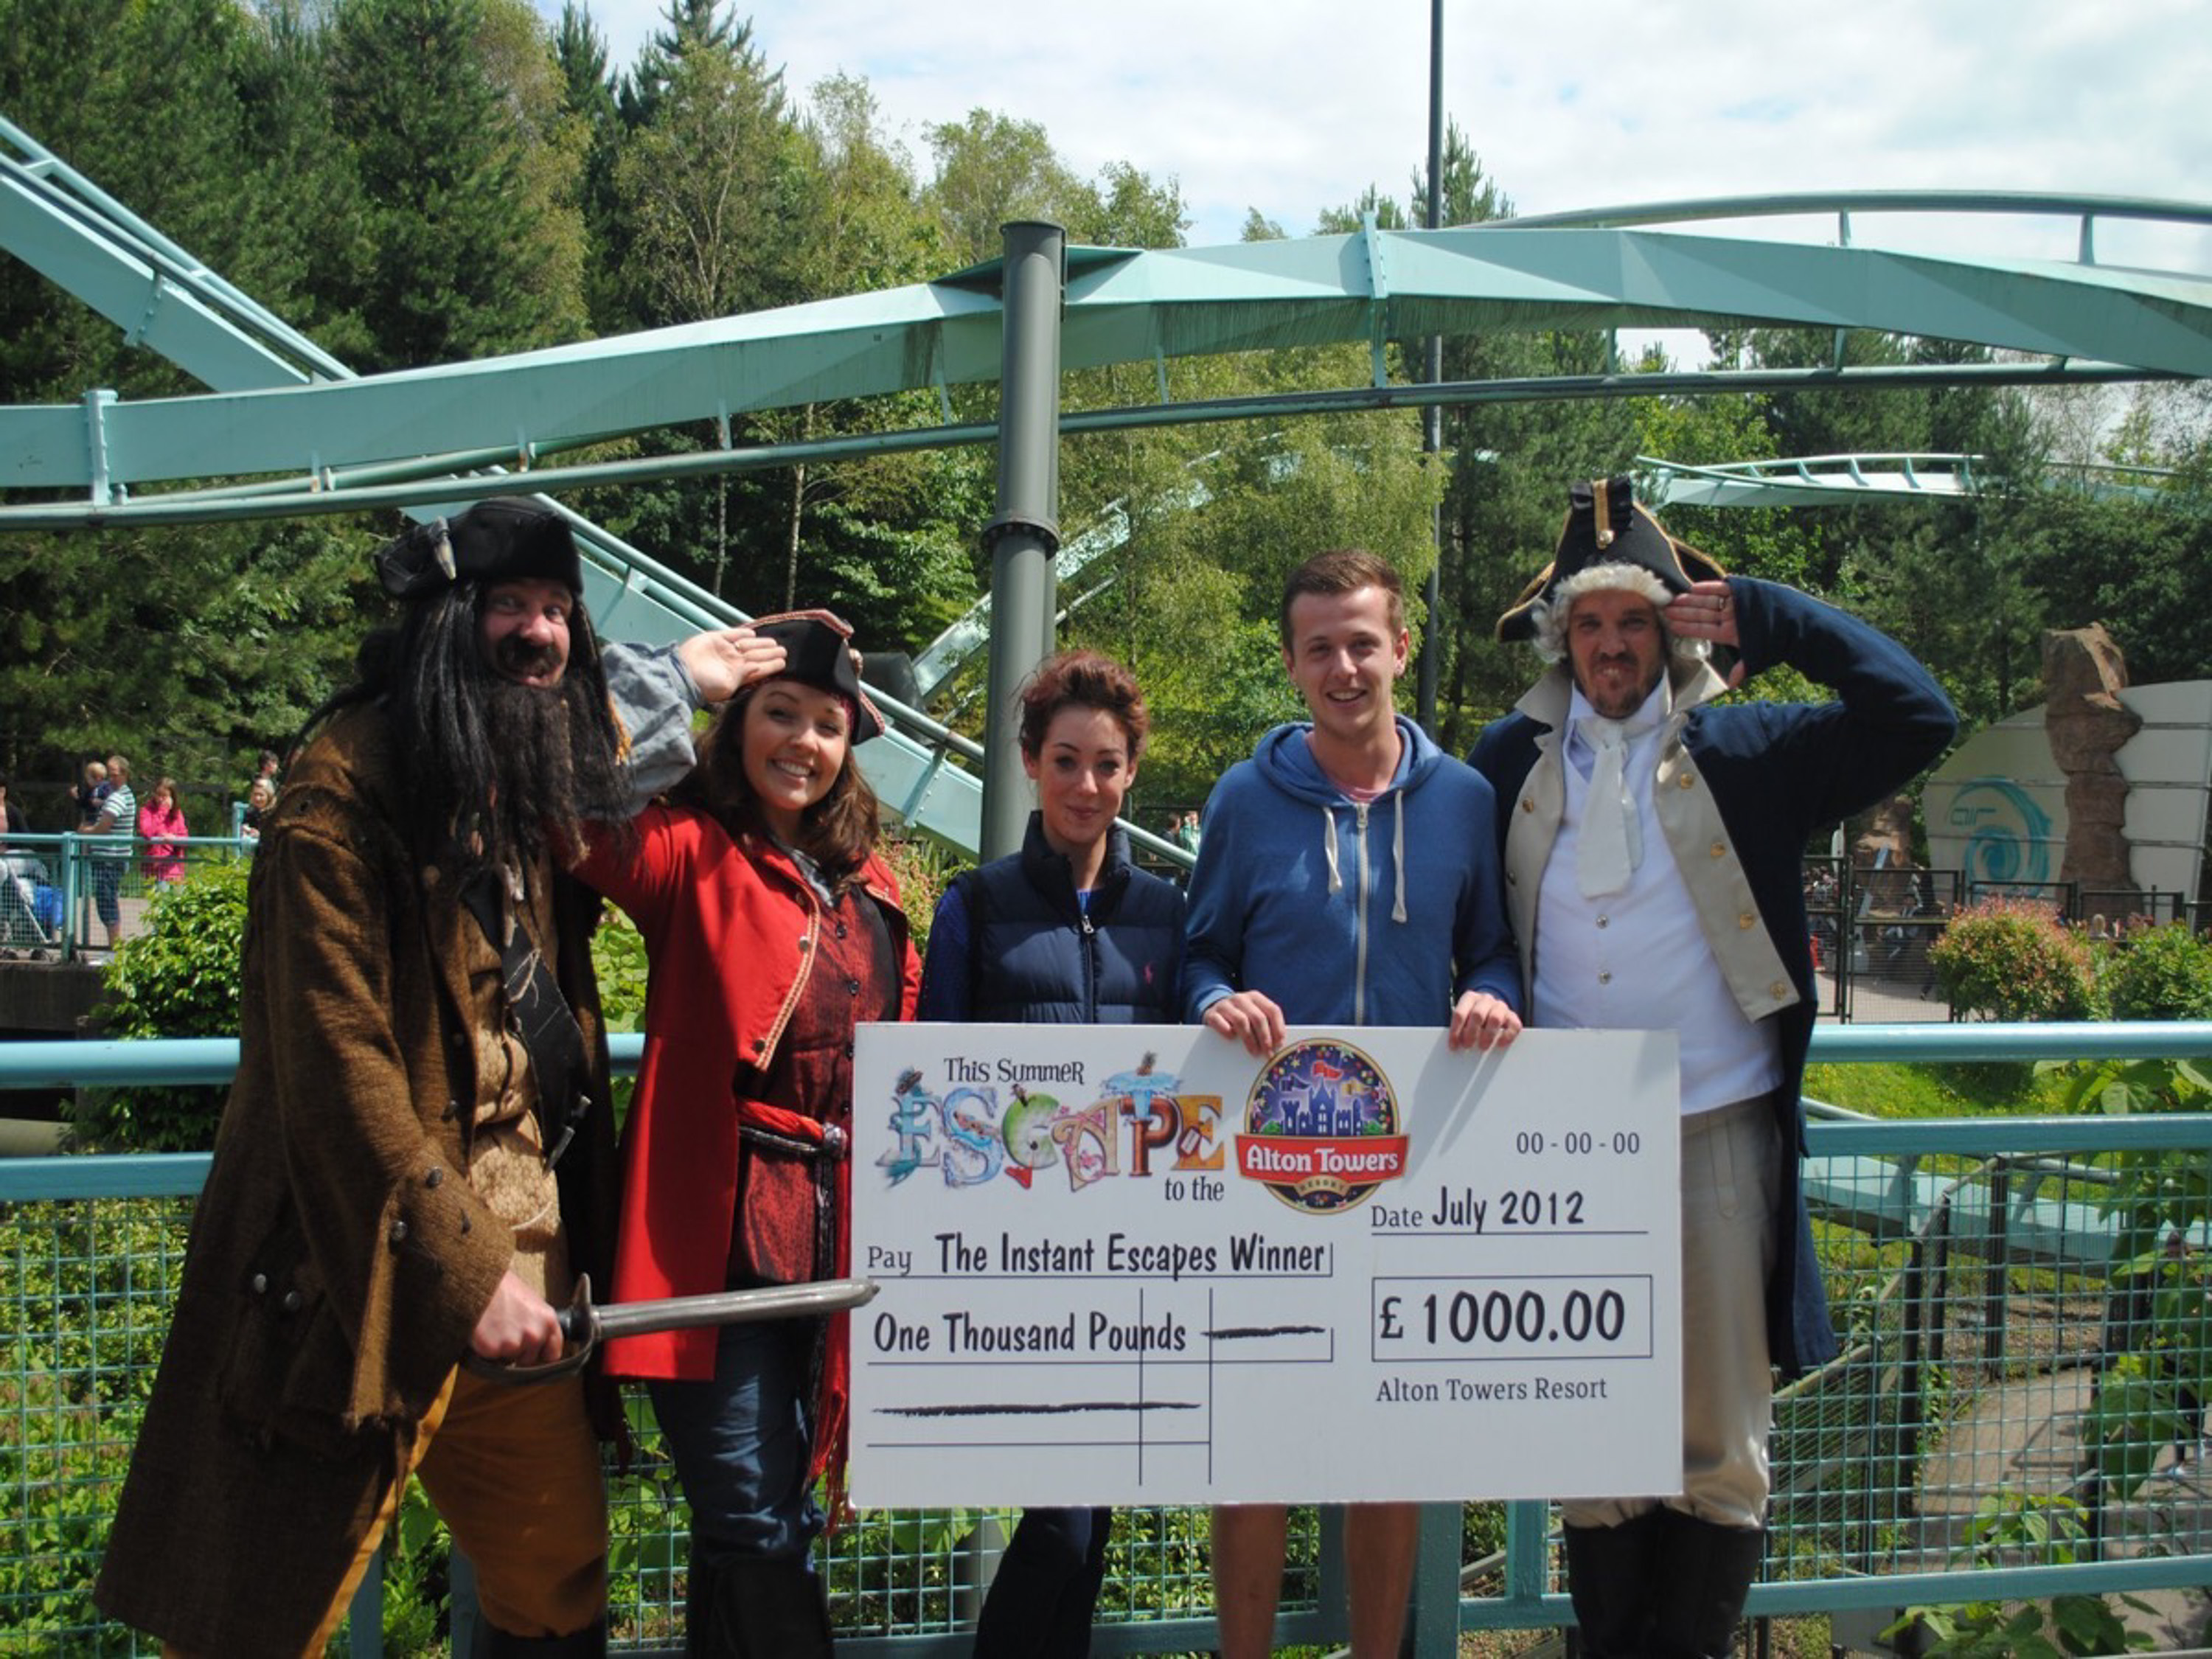 Alton Towers gives away £1000 to lucky guests